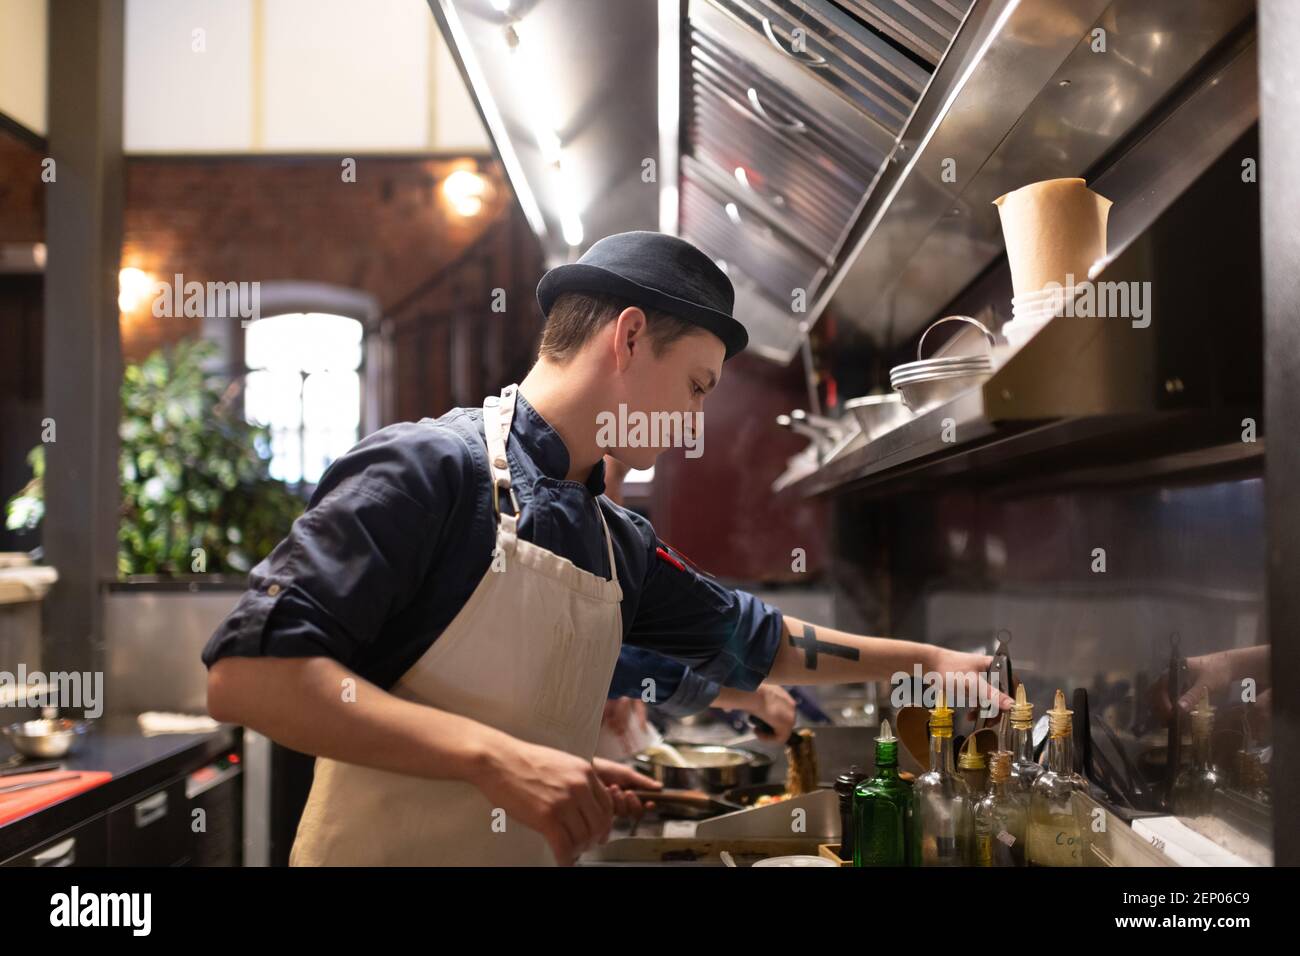 Young cook in hat and apron taking tongs while preparing dish in cafe kitchen Stock Photo